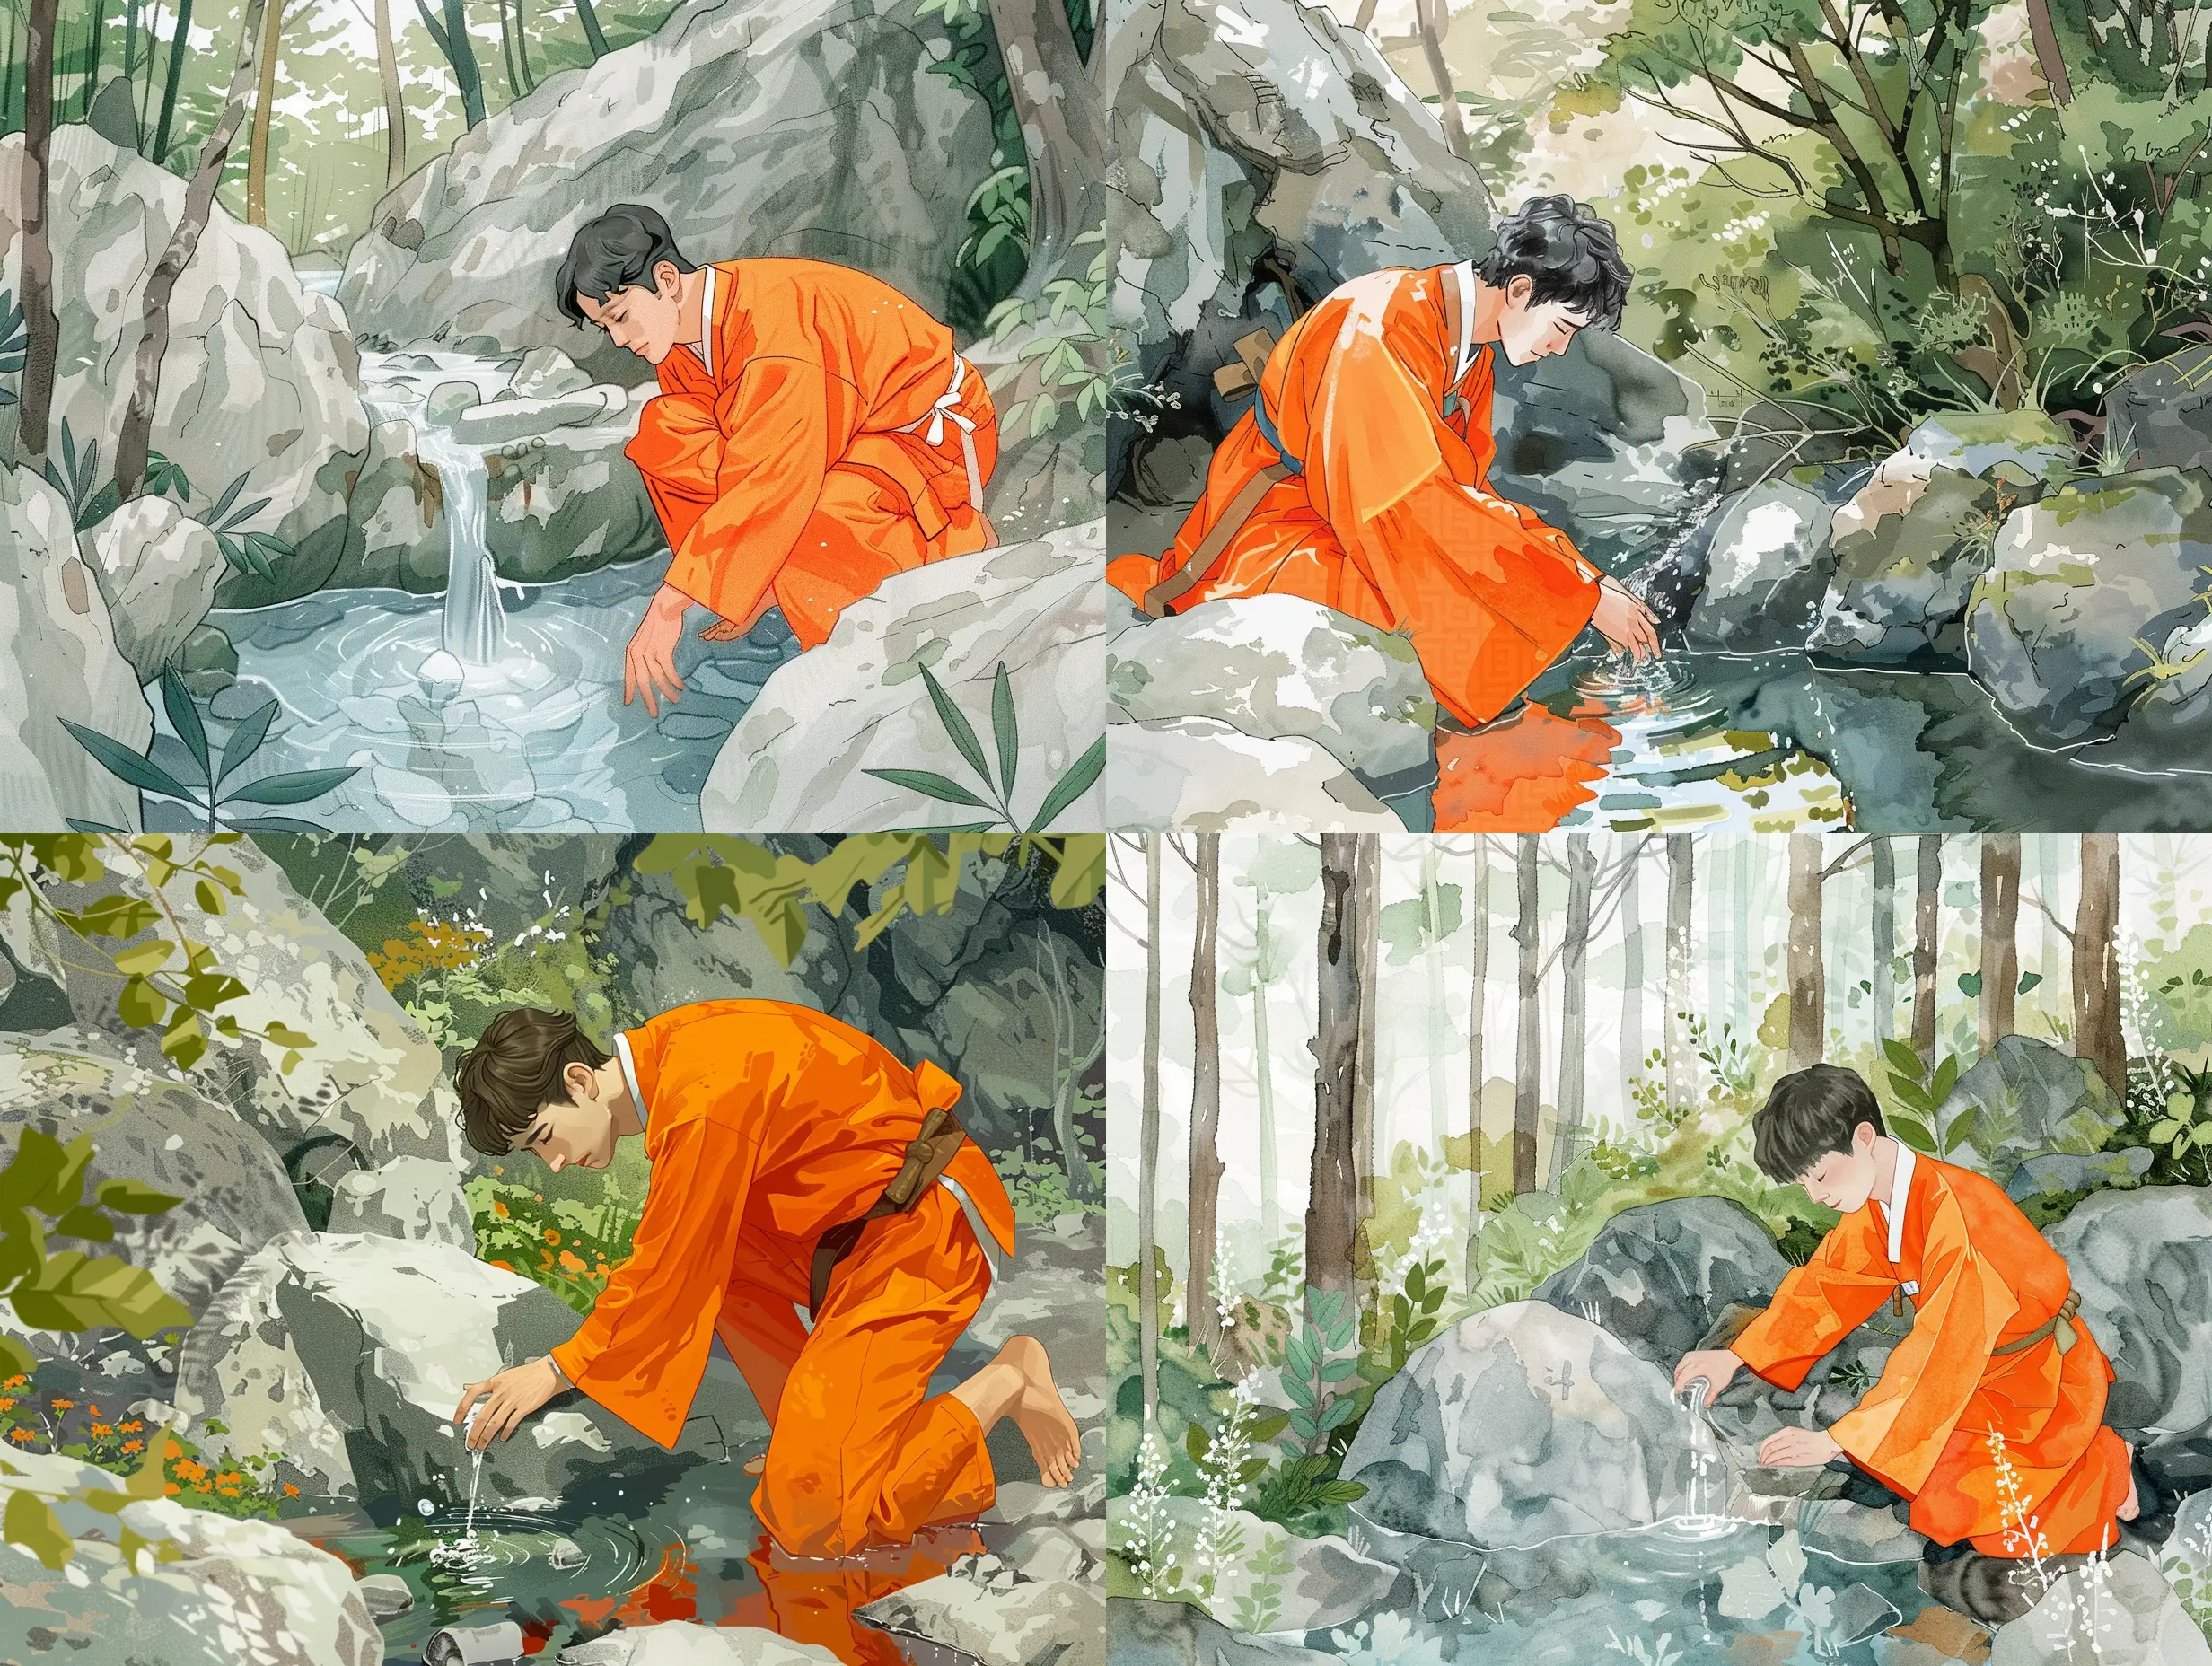 Illustration like fairytale about young handsome Korean man in orange kimono, he is in the mountain forest finds a spring flowing under the rock and the water in it is clear and clean. He approached the spring, knelt down and let him drink the water